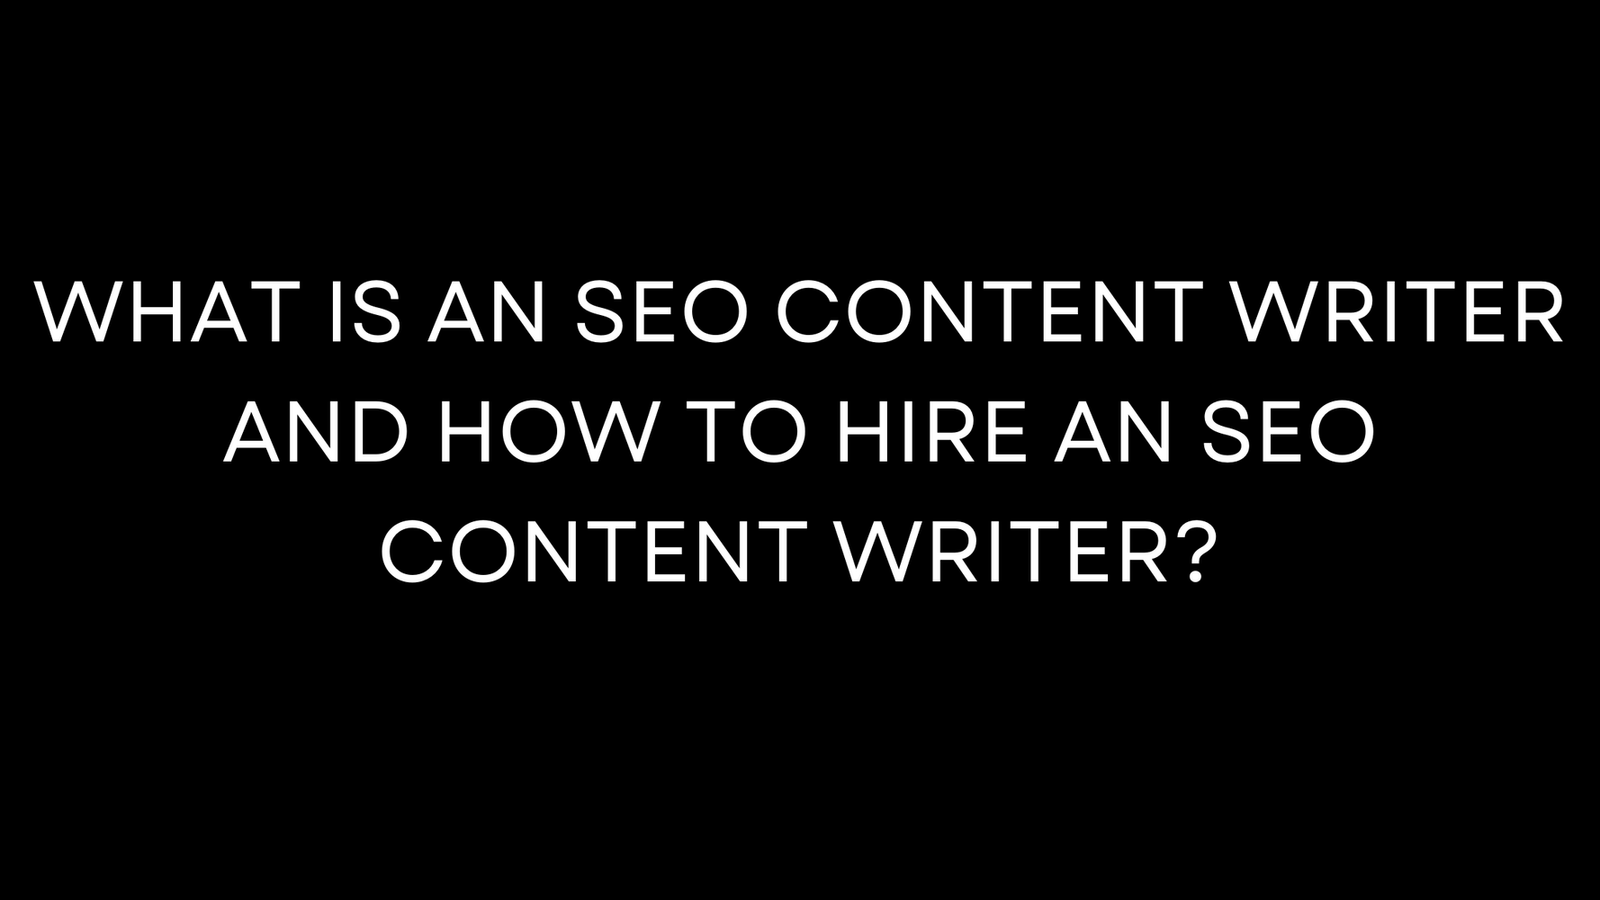 What is an SEO content writer and how to hire one?